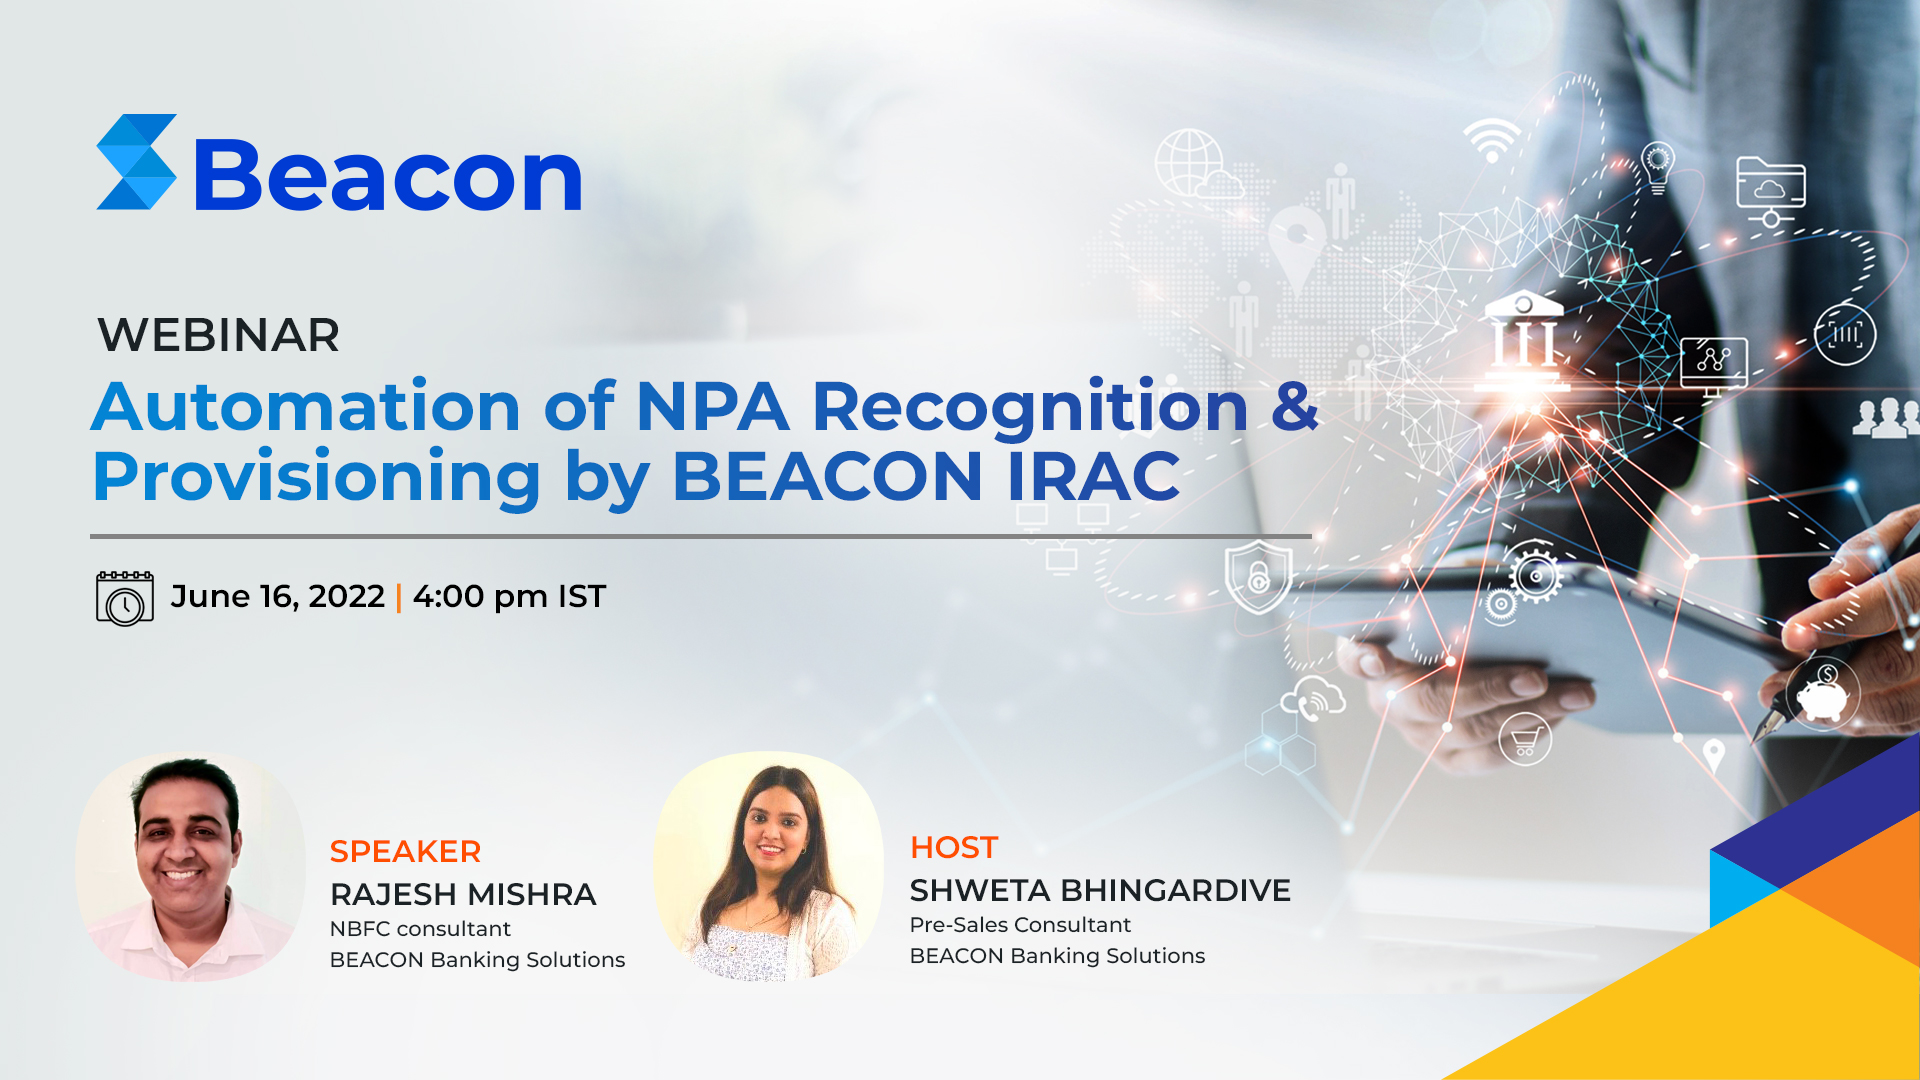 Automation of NPA Recognition & Provisioning by BEACON IRAC